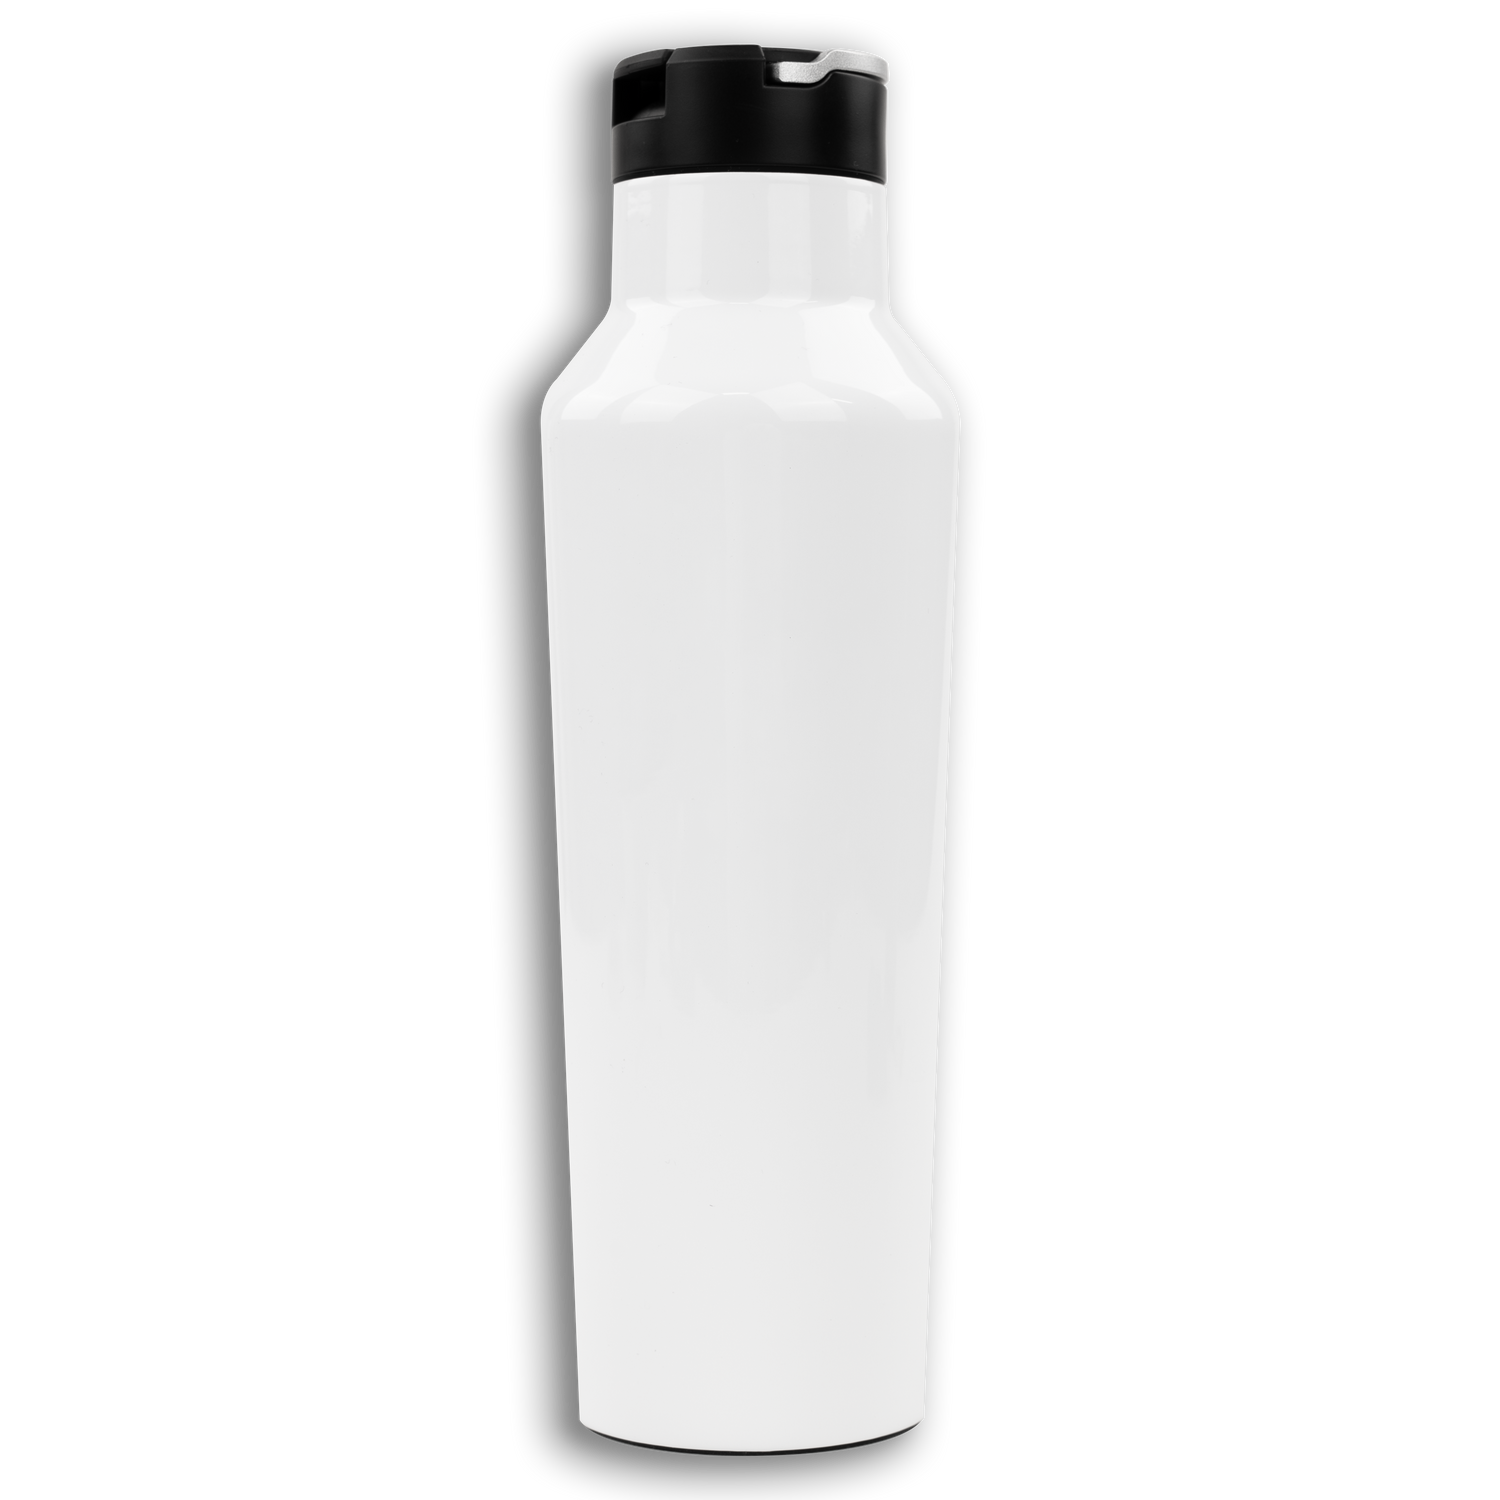 Texas A&M Insulated White Corkcicle Sport Canteen Water Bottle 20 Oz